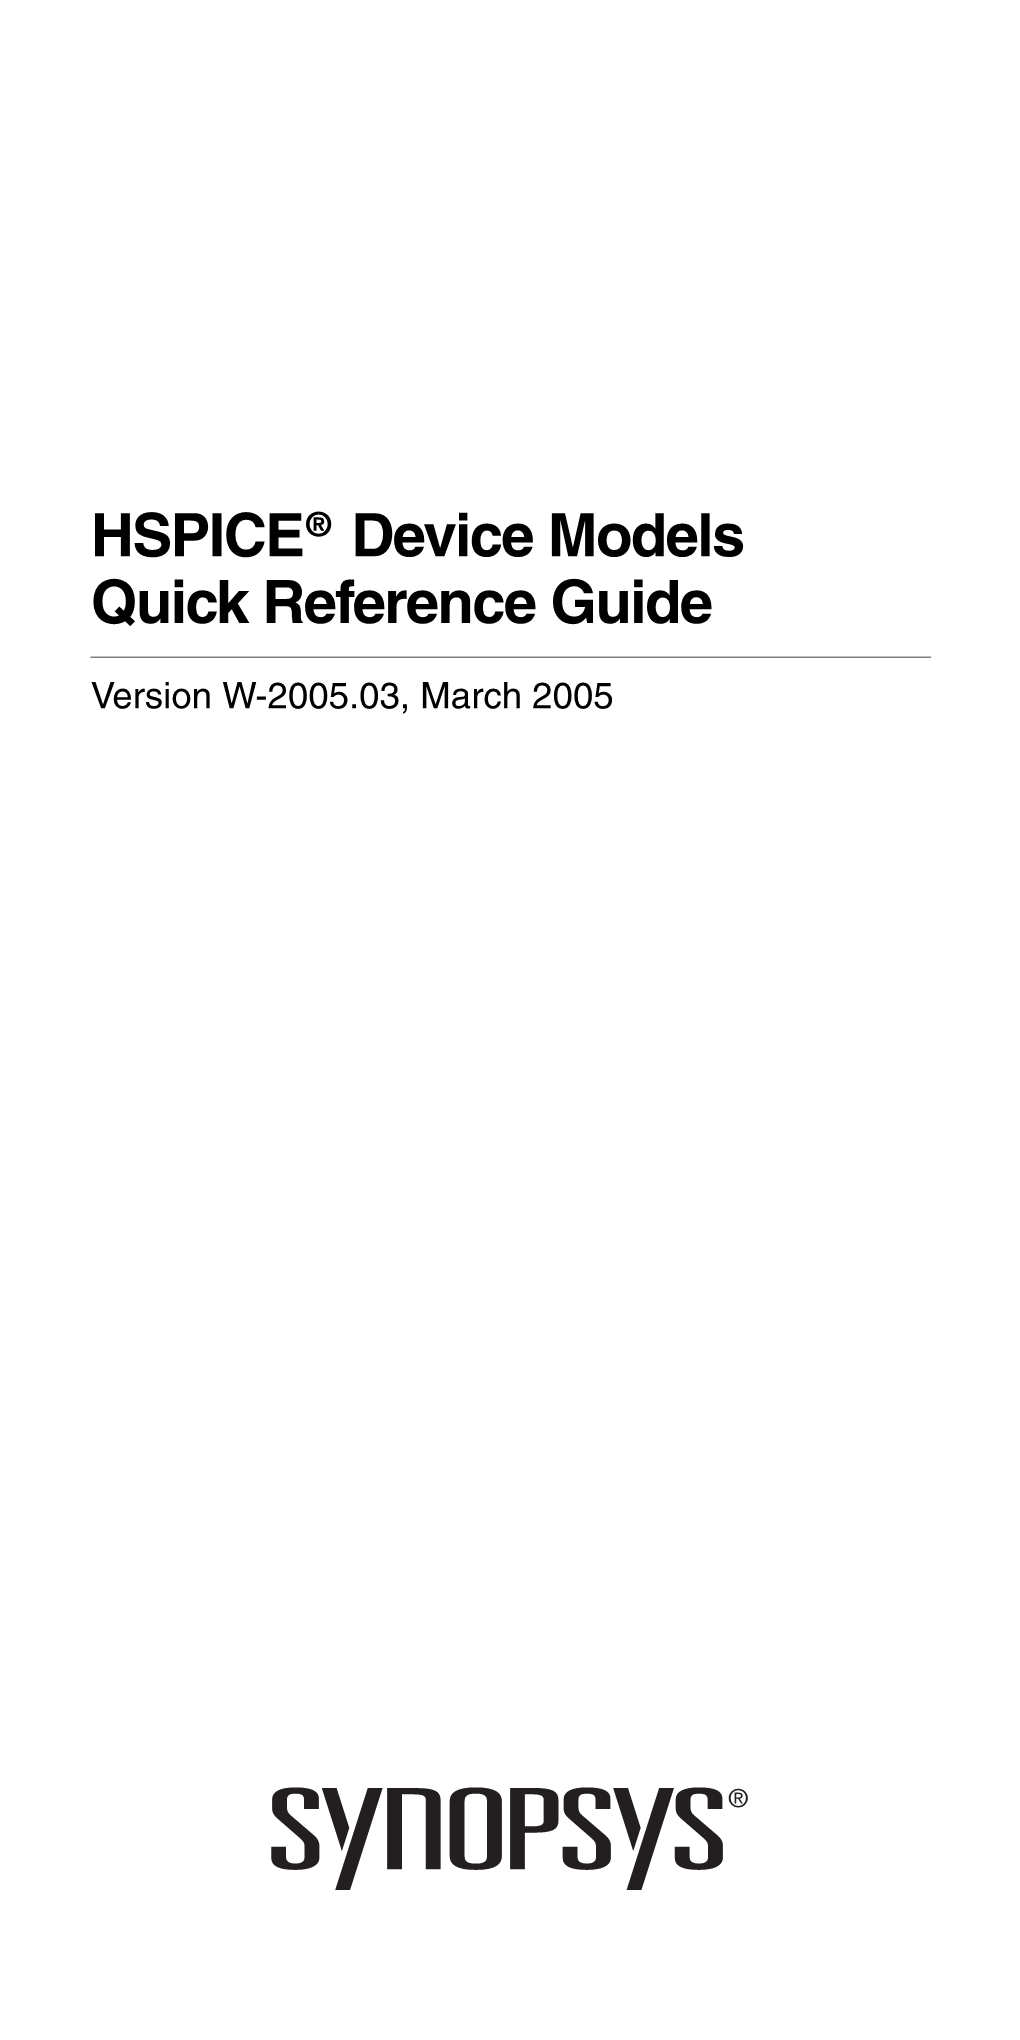 HSPICE Device Models Quick Reference Guide